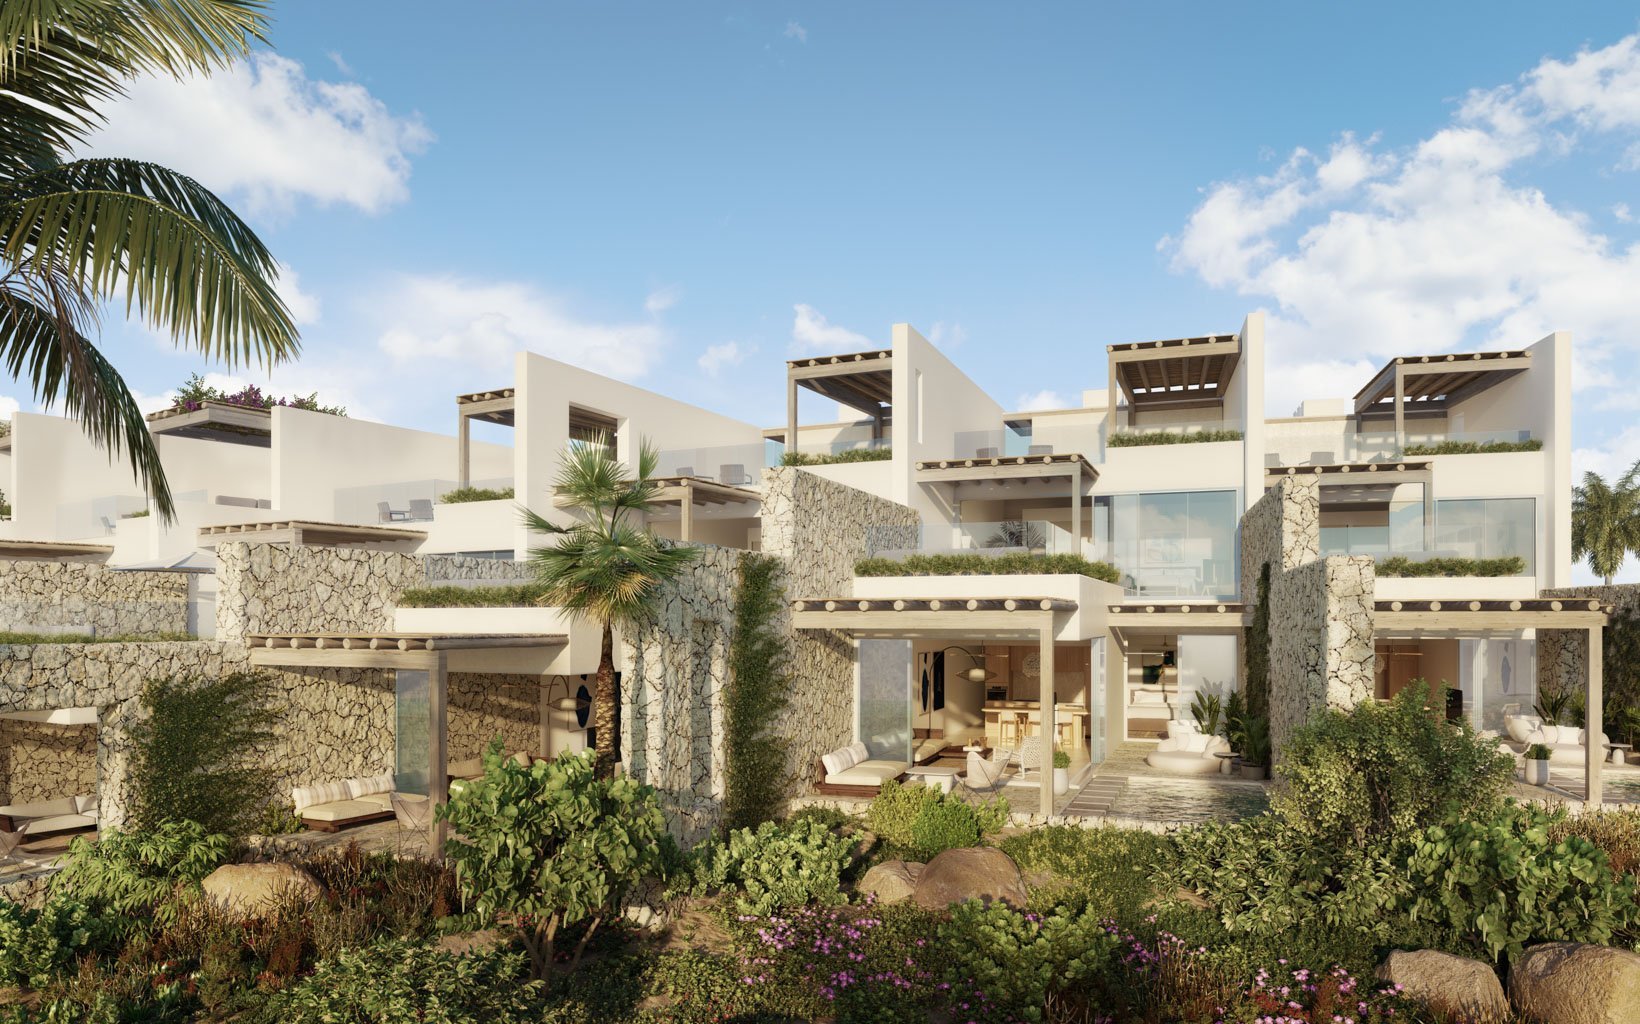 The Strand Turks and Caicos - exterior view of Luxury Residences with lush landscaping